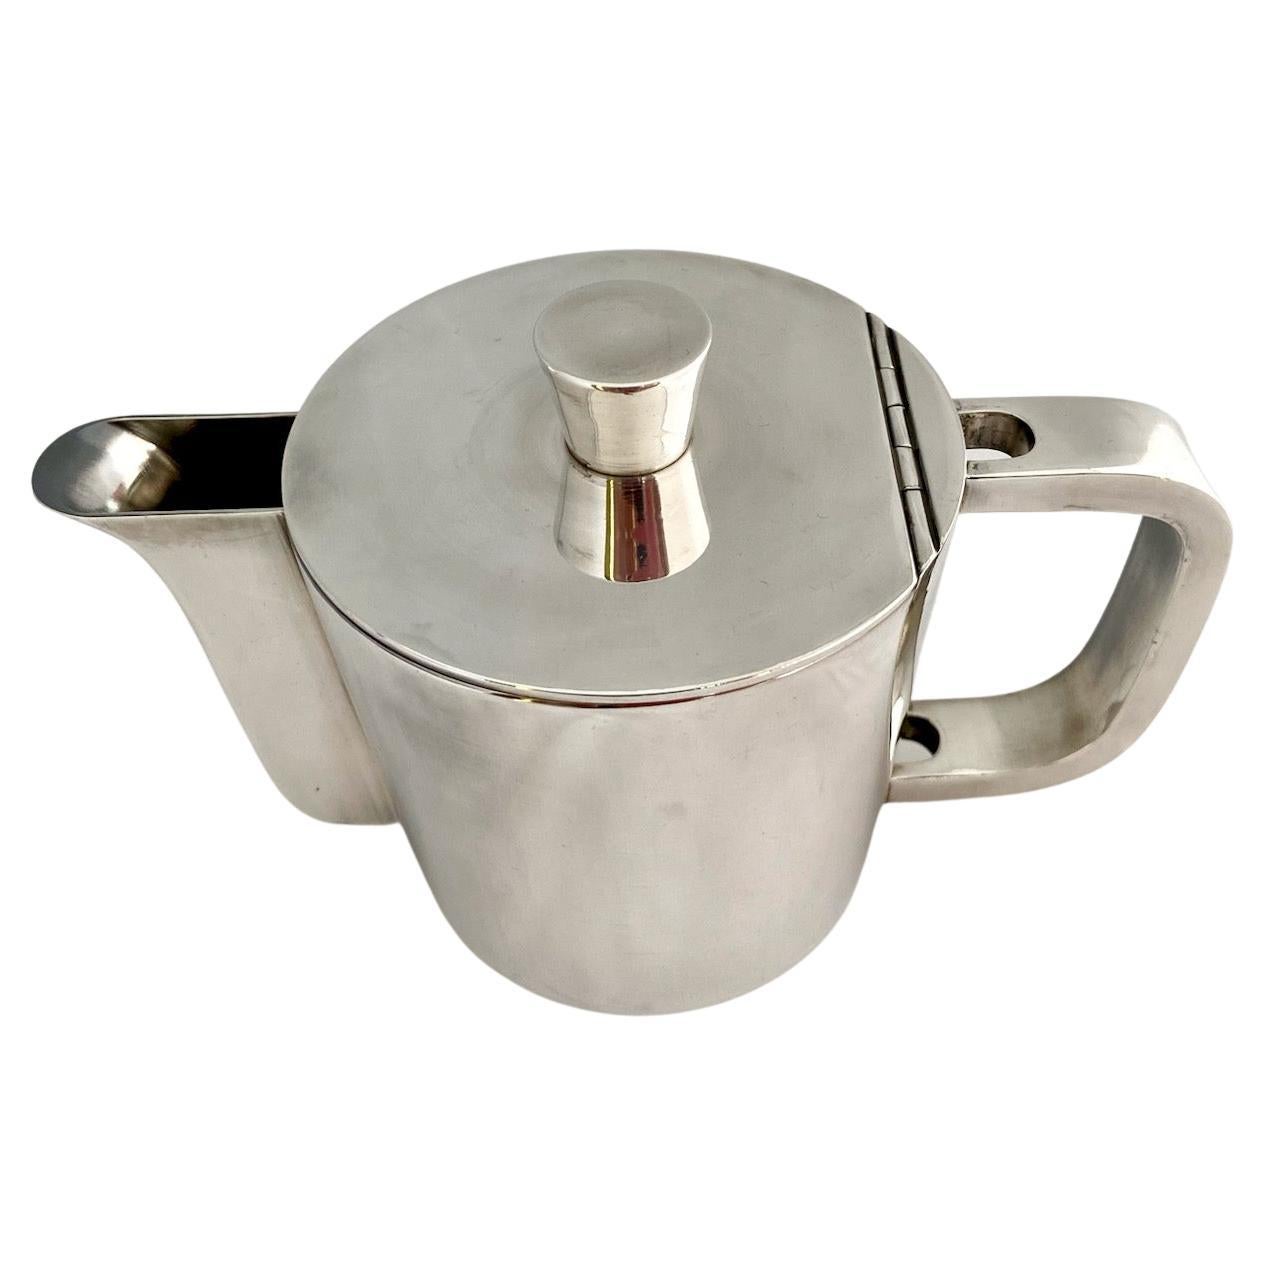 Silvered Mid-century Gio Ponti silver plated coffee pot and a tiny Arthur Krupp dish